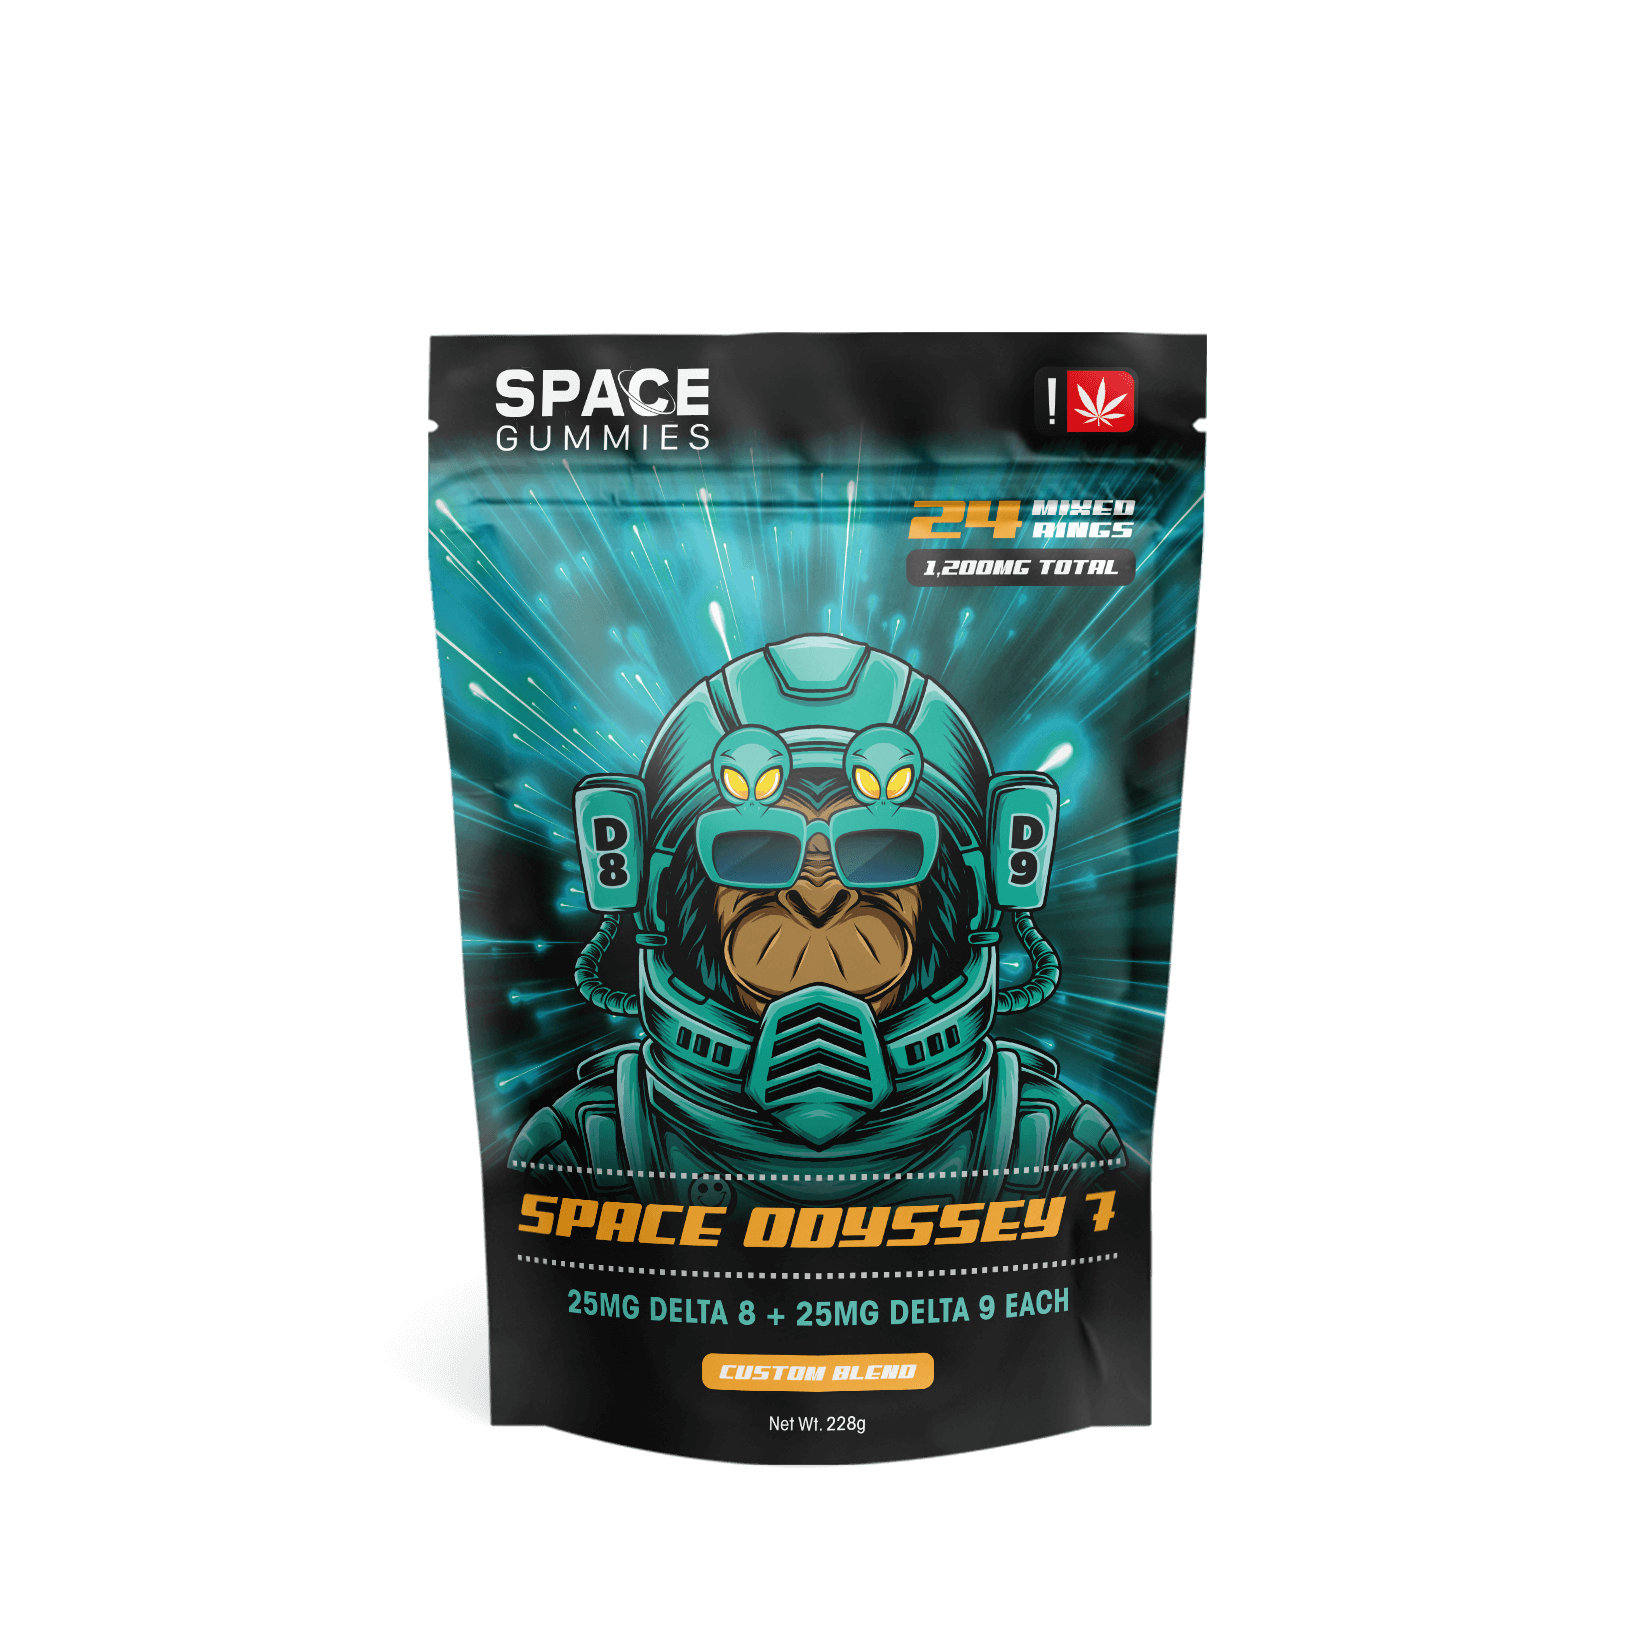 space gummies 7 come with 25mg delta 8 THC and 25mg Delta 9 THC